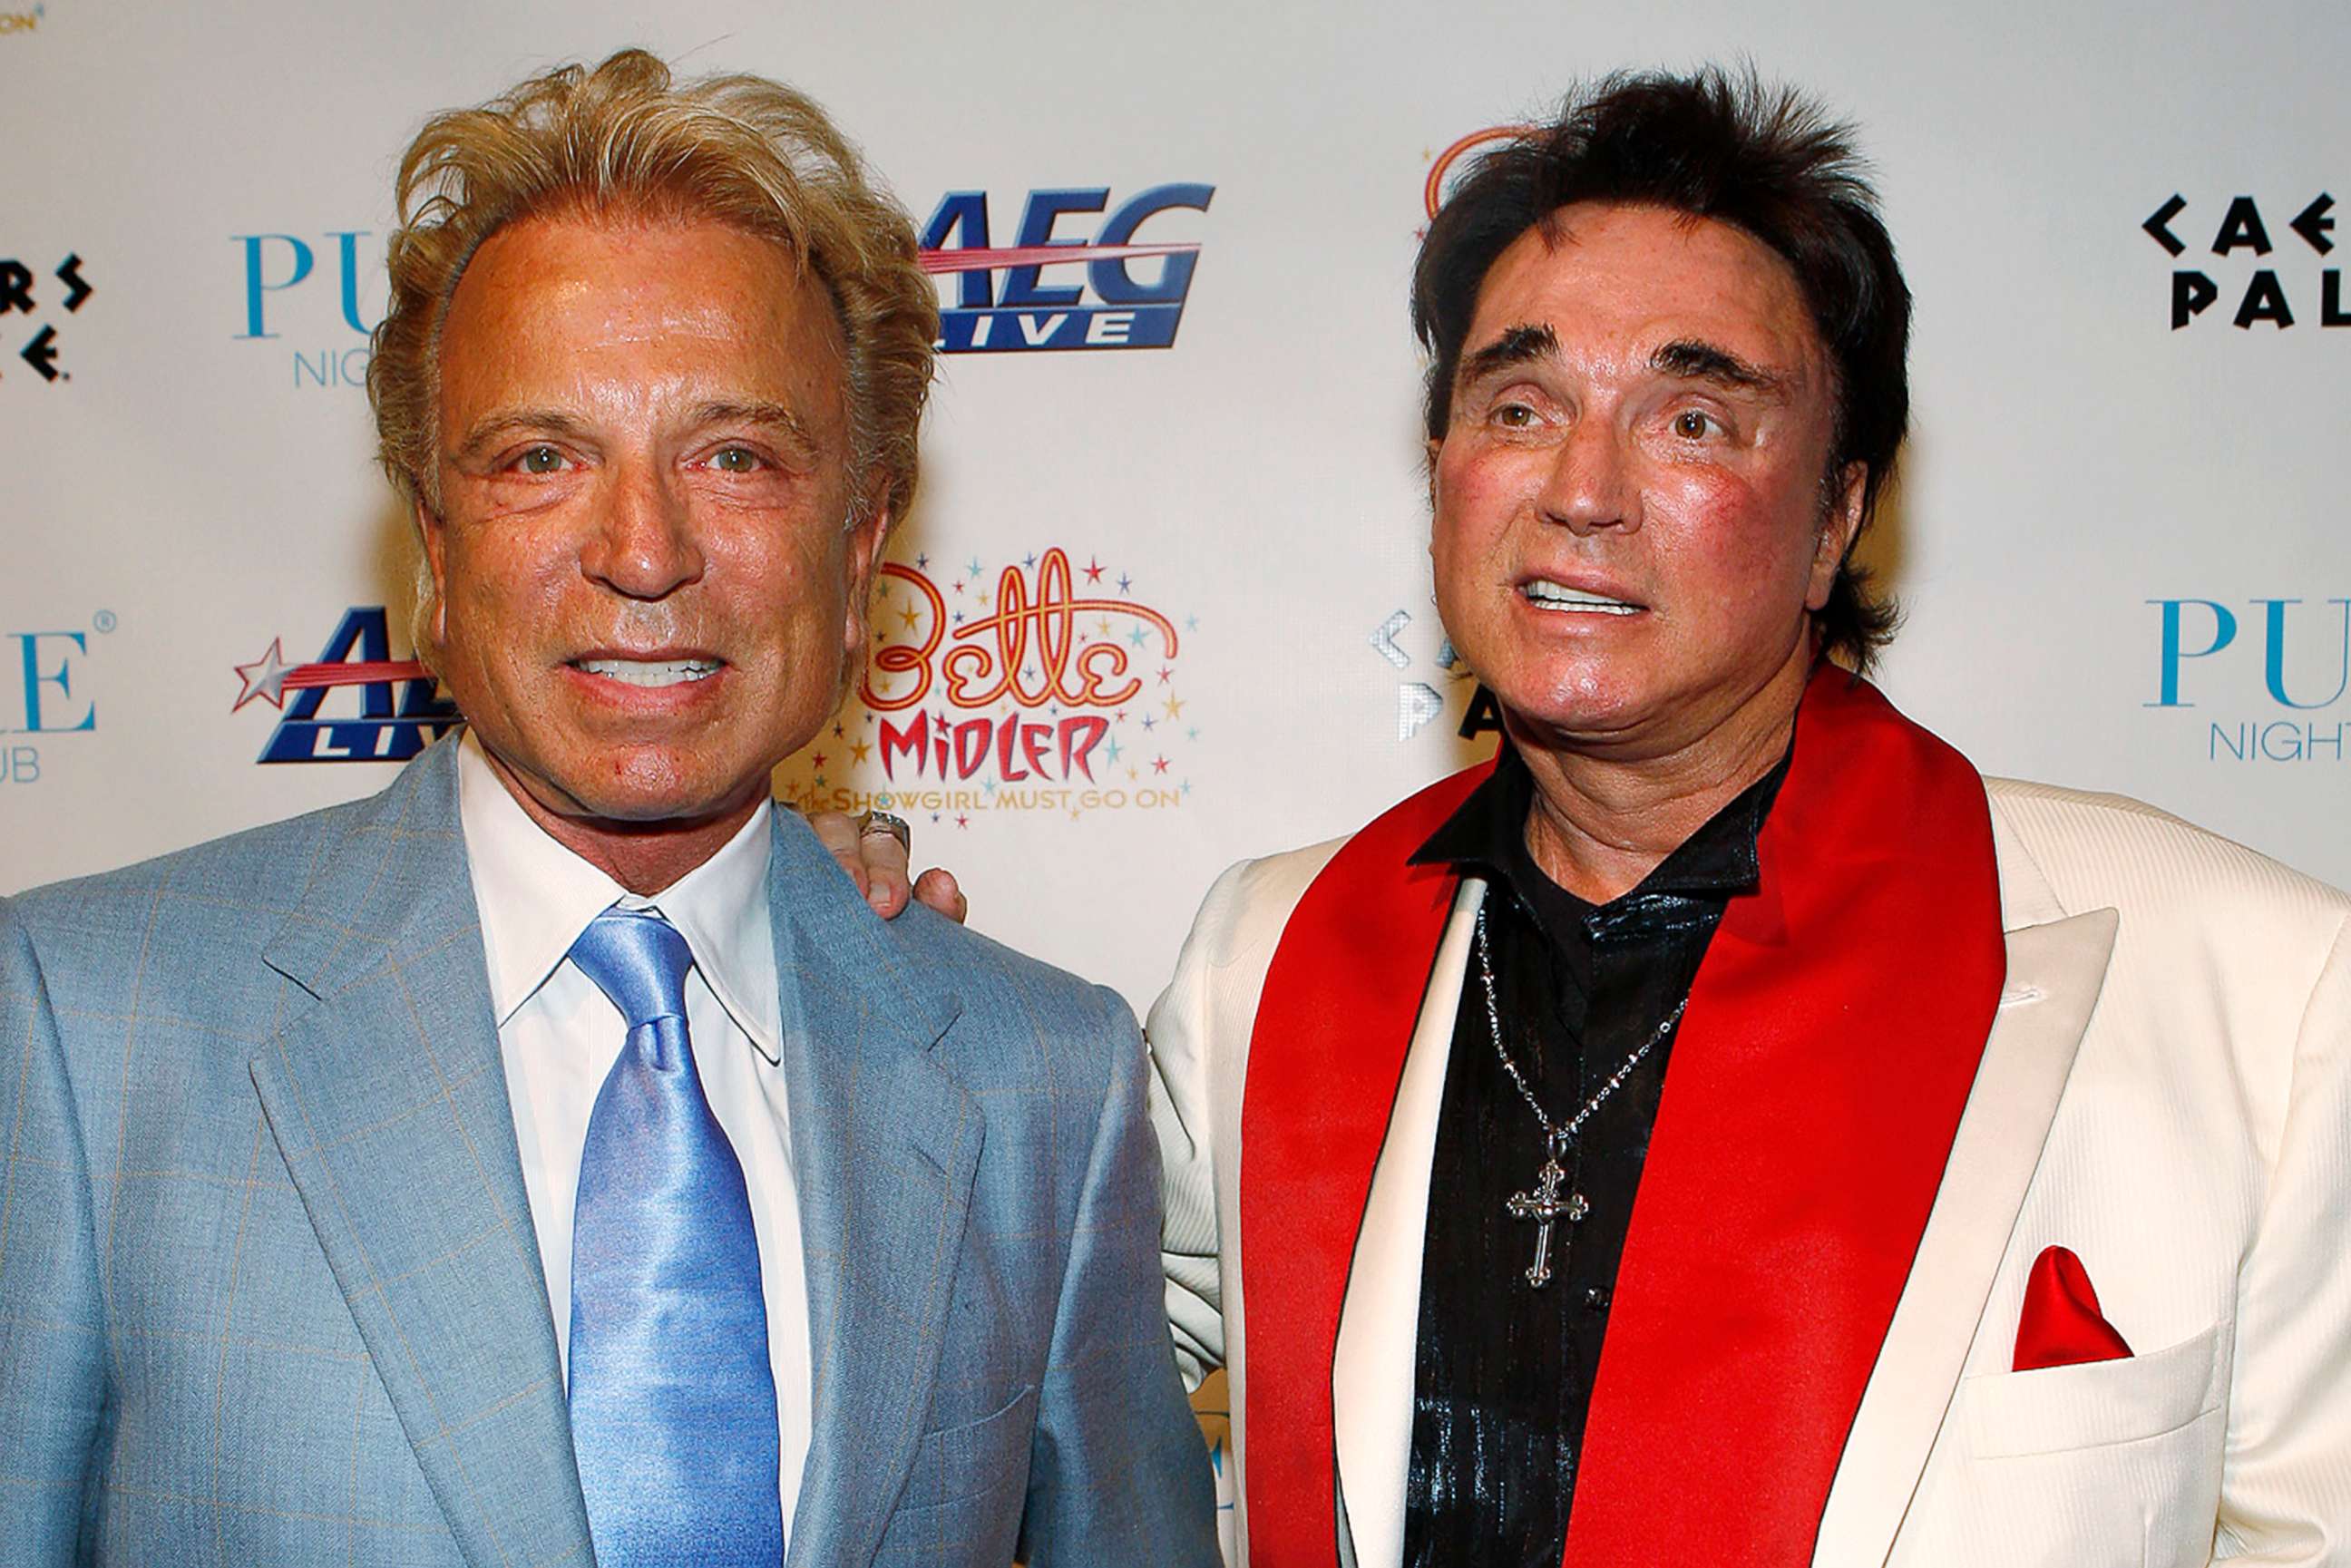 PHOTO: FILE - In this Feb. 20, 2008, file photo, Siegfried Fischbacher, left, and Roy Horn arrive at a party following the premiere performance of Bette Midler's "The Showgirl Must Go On" at Caesar's Palace hotel and casino in Las Vegas. 